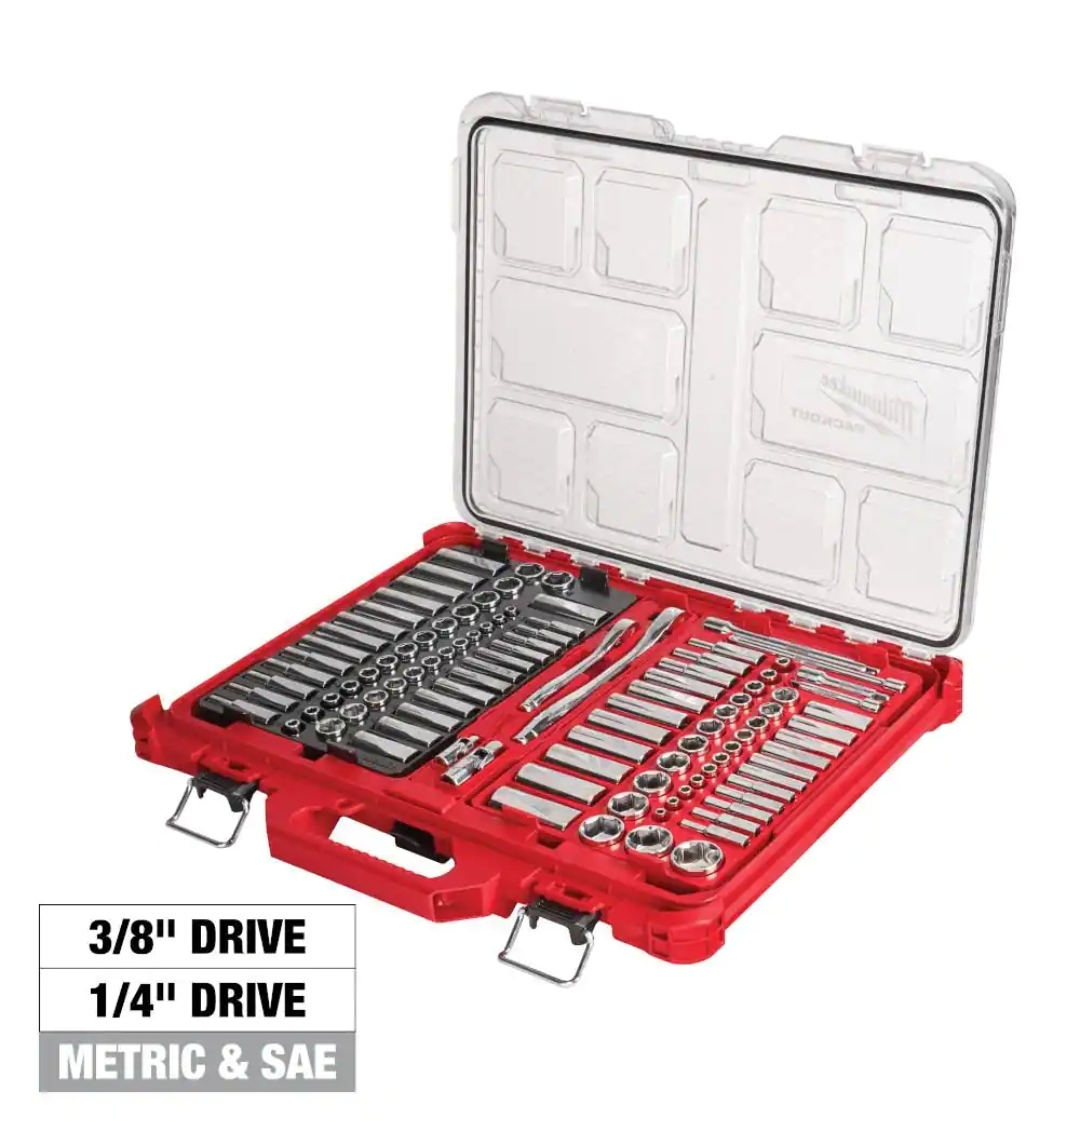 Milwuakee Tool Set with PACKOUT Case (106-Piece) $249